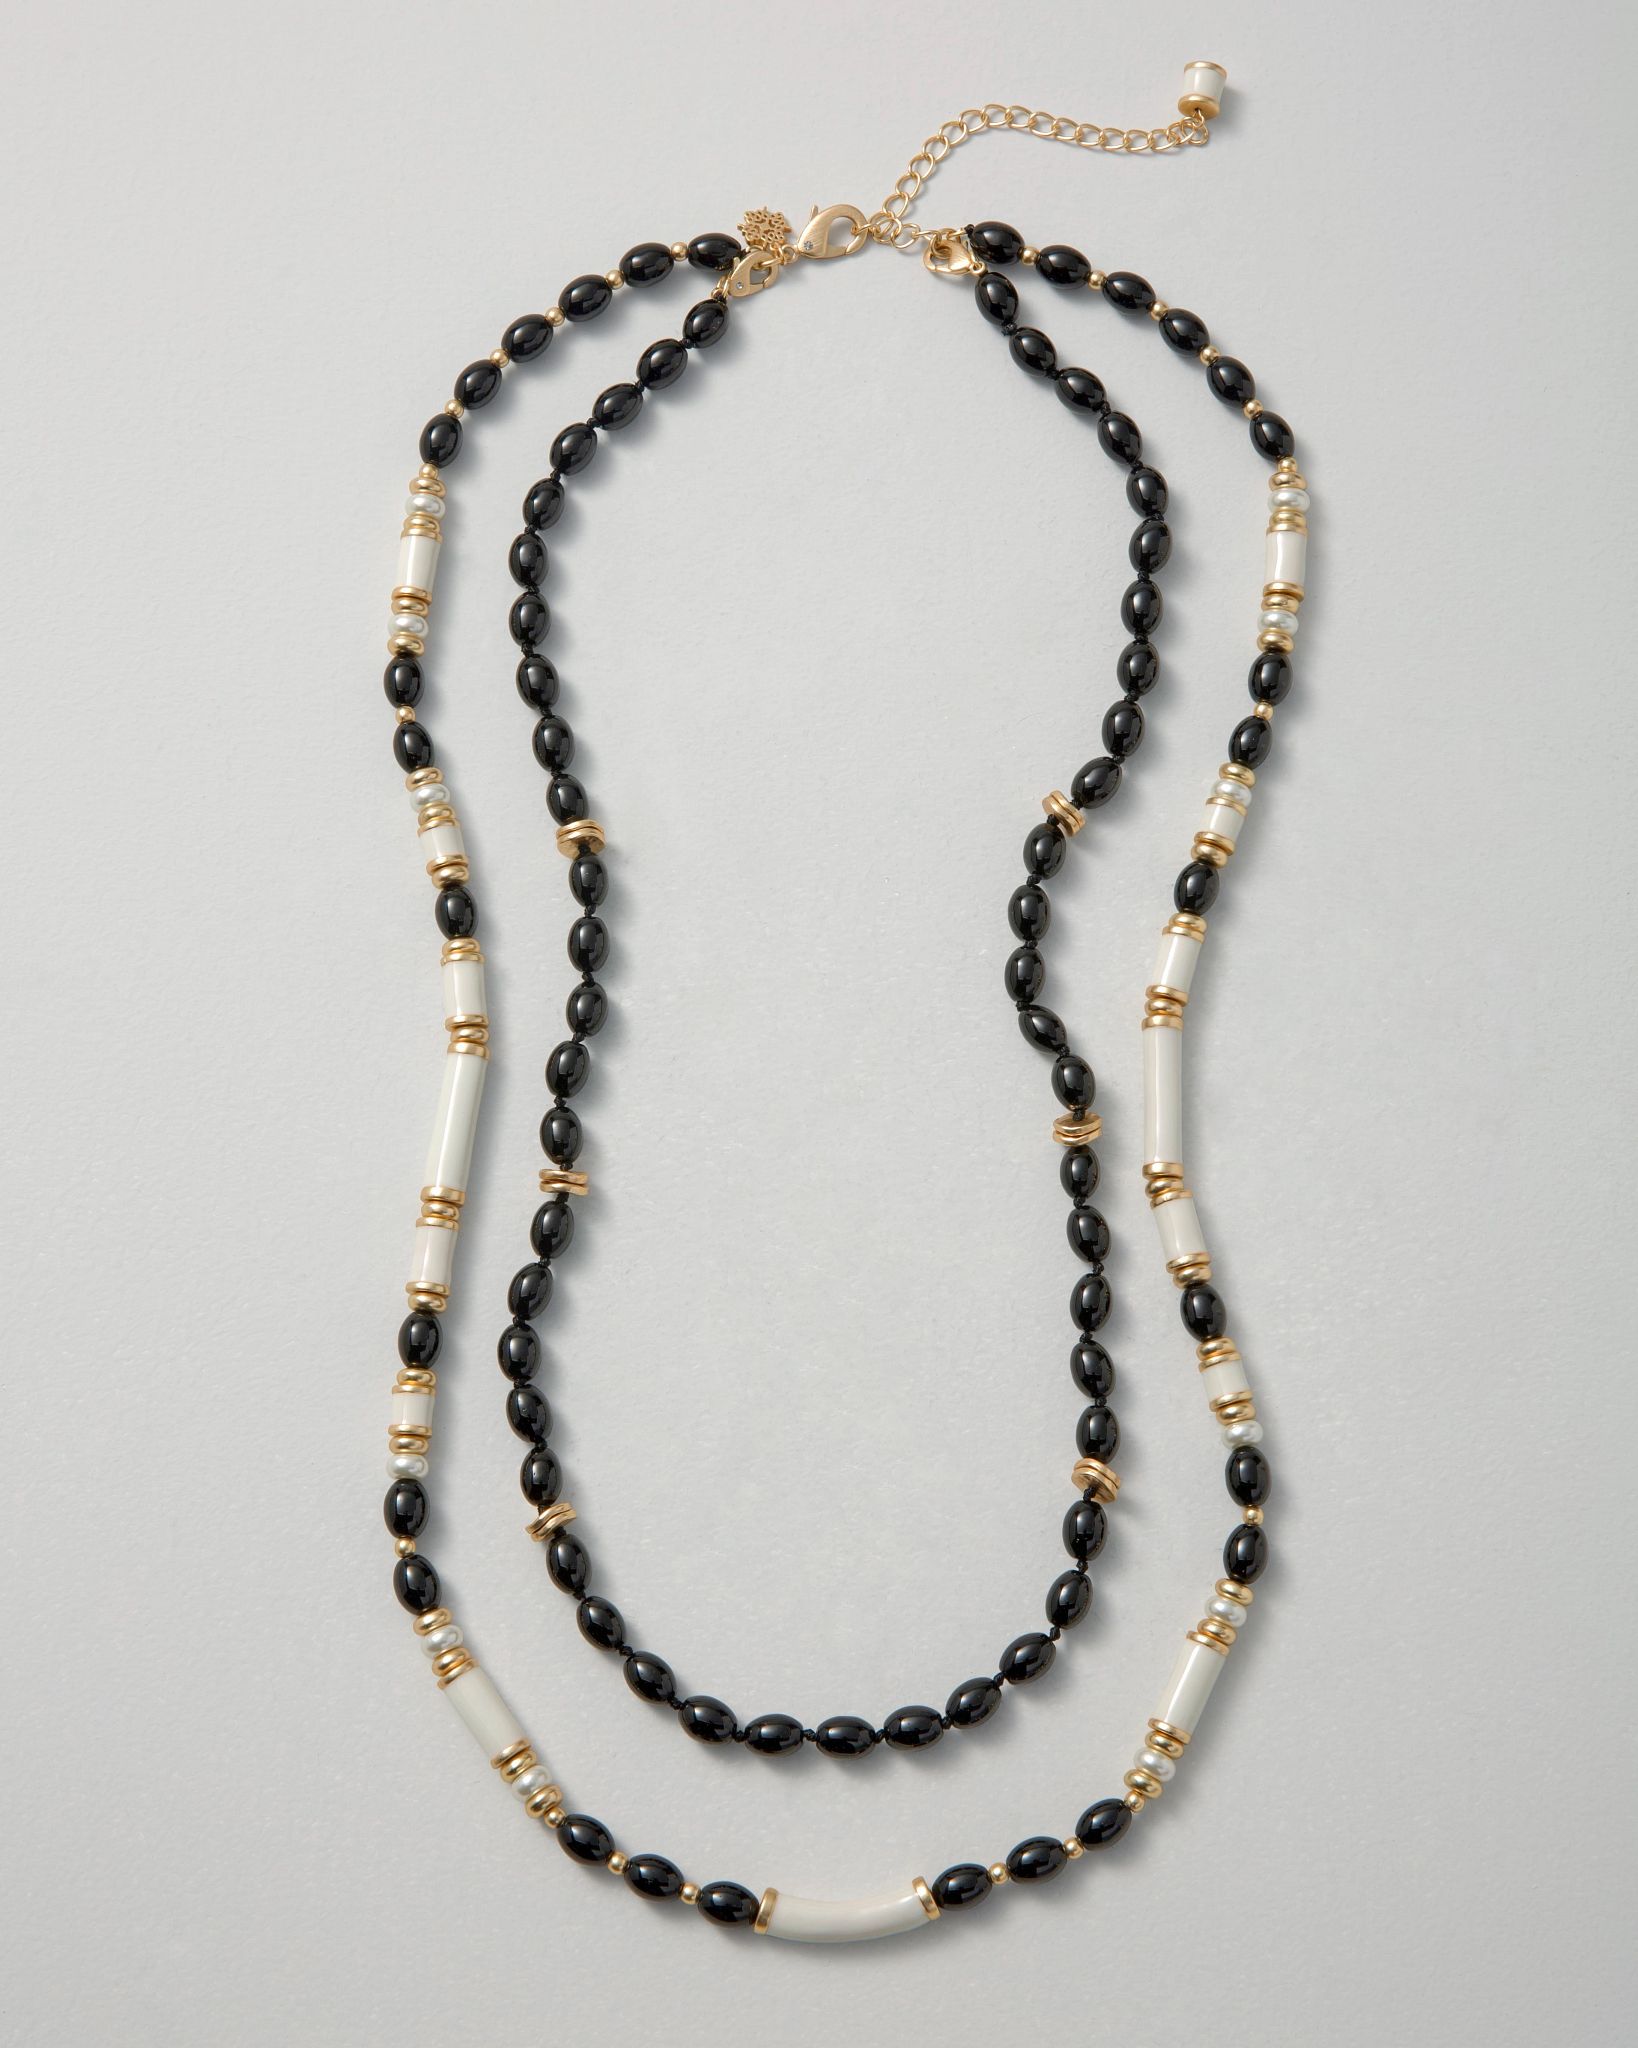 Convertible Multi-Row Goldtone, Black & Ecru Necklace click to view larger image.